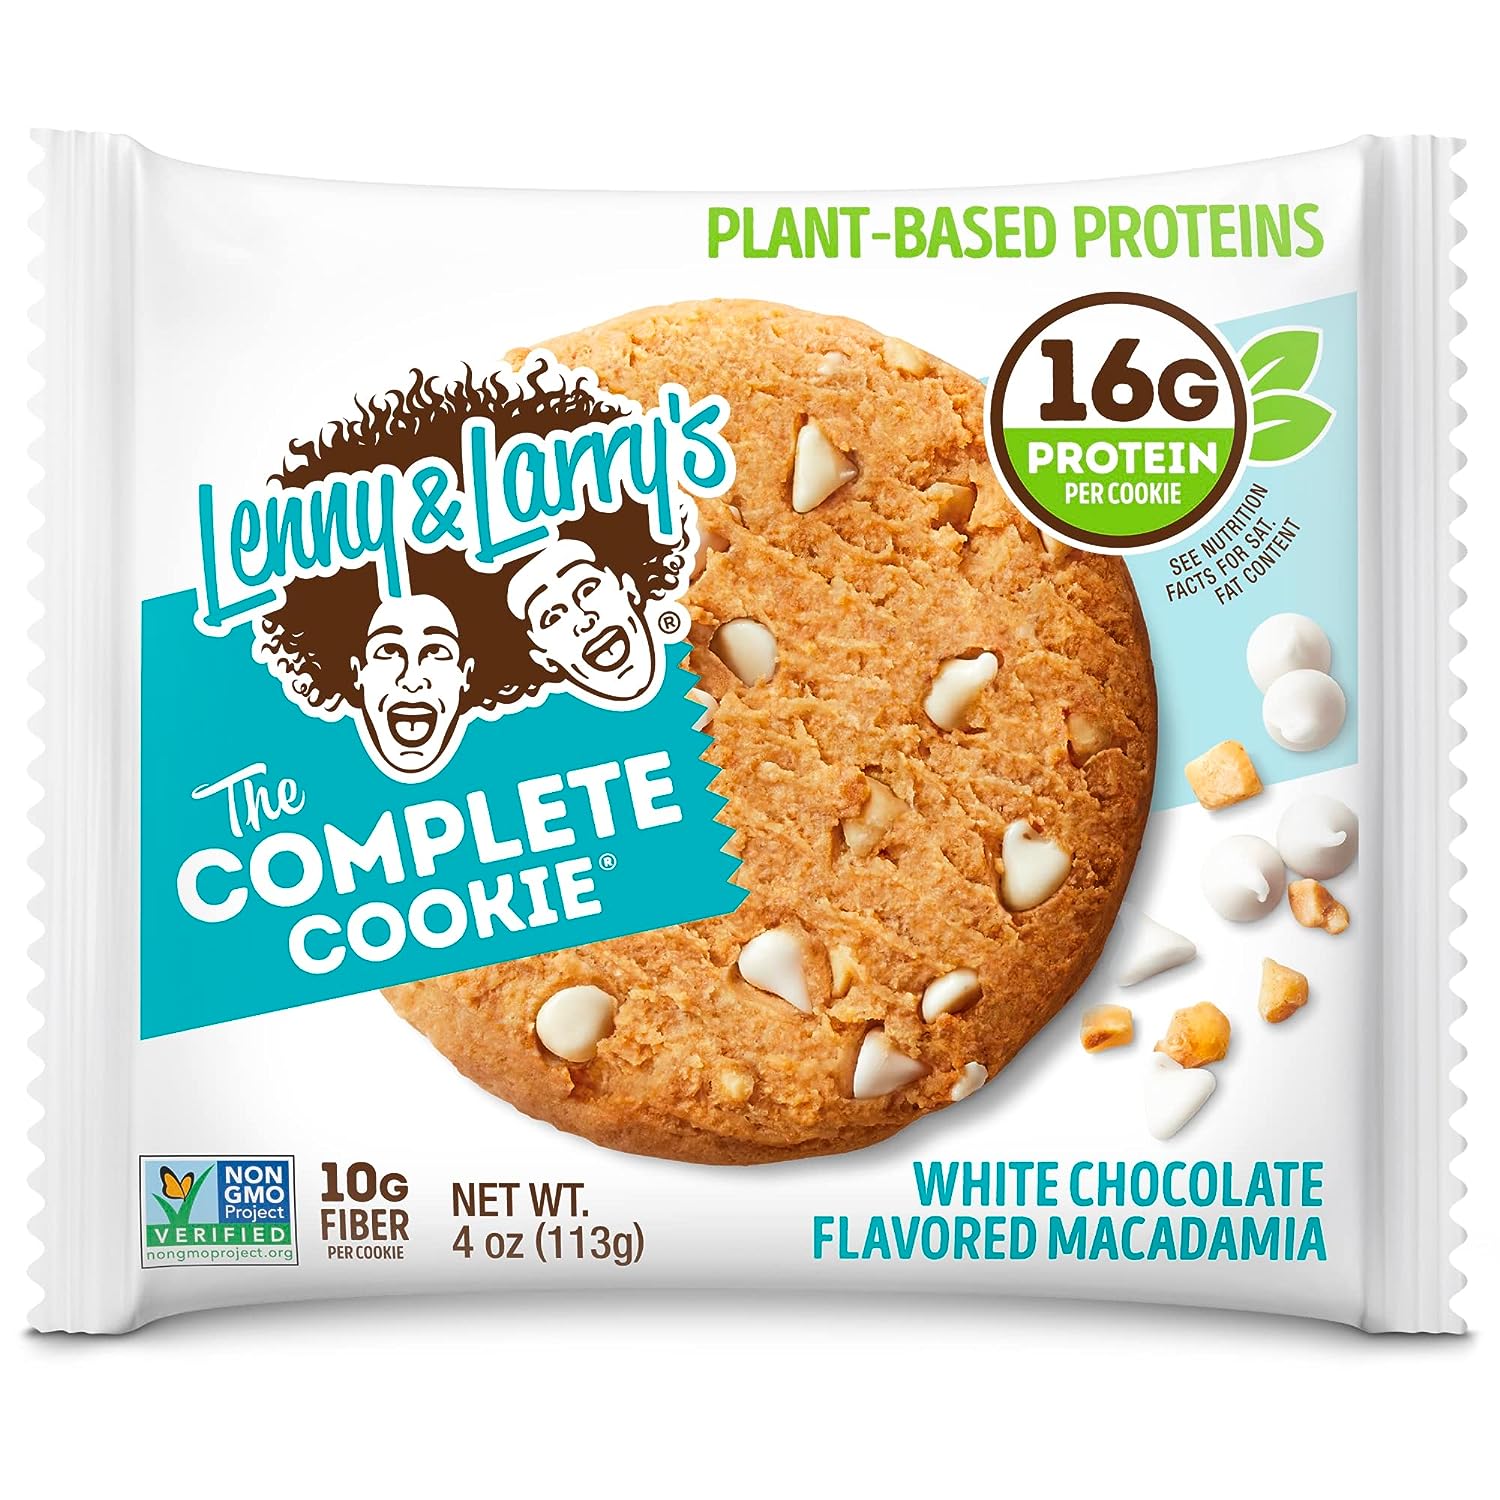 Lenny & Larry's The Complete Cookie, White Chocolaty Macadamia, Soft Baked, 16g Plant Protein, Vegan, Non-GMO, 113g